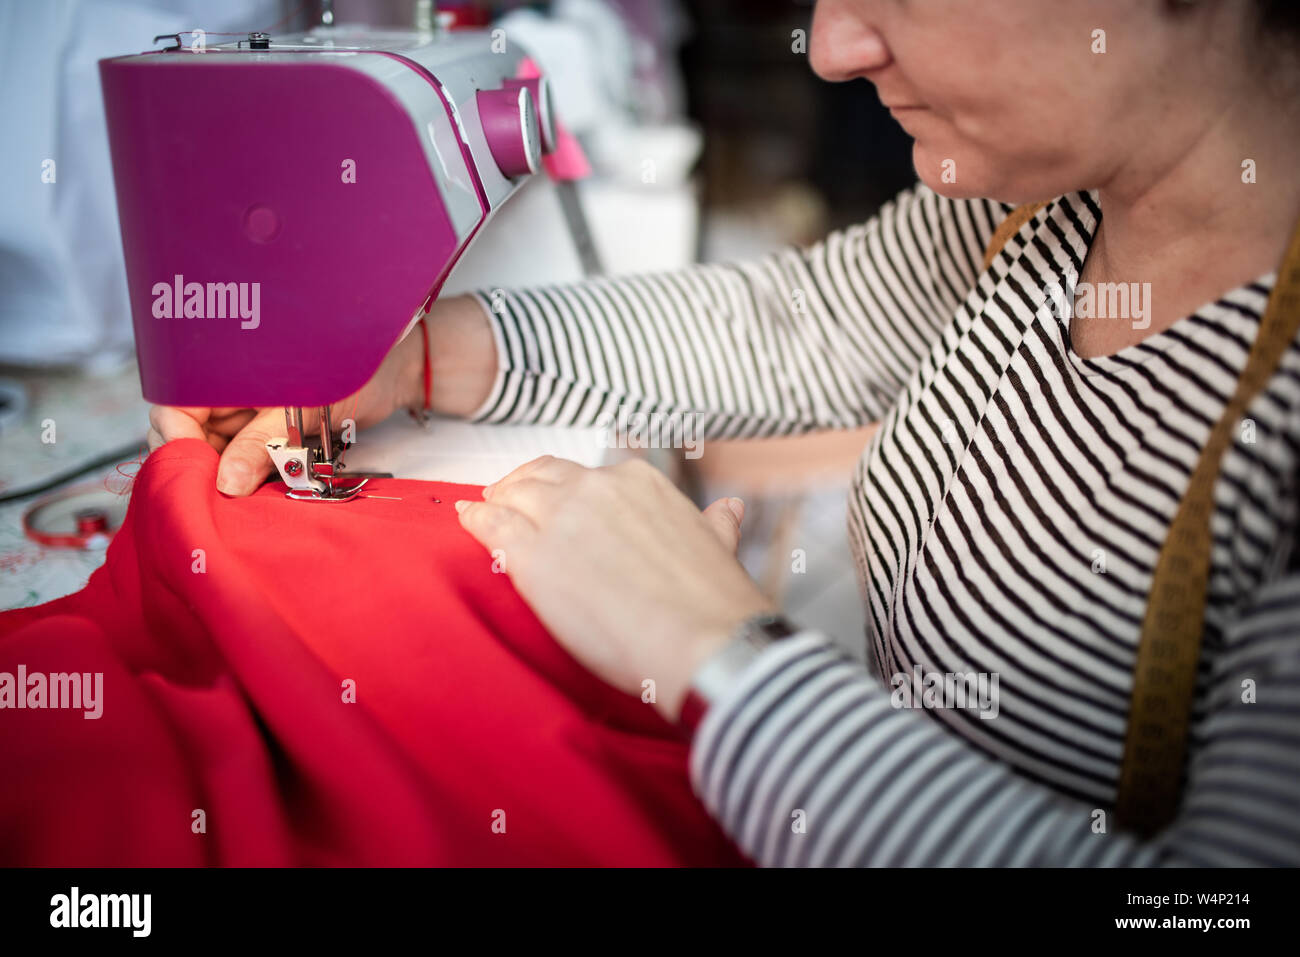 https://c8.alamy.com/comp/W4P214/closeup-of-adult-woman-seamstress-sews-clothes-and-put-thread-in-needl-W4P214.jpg